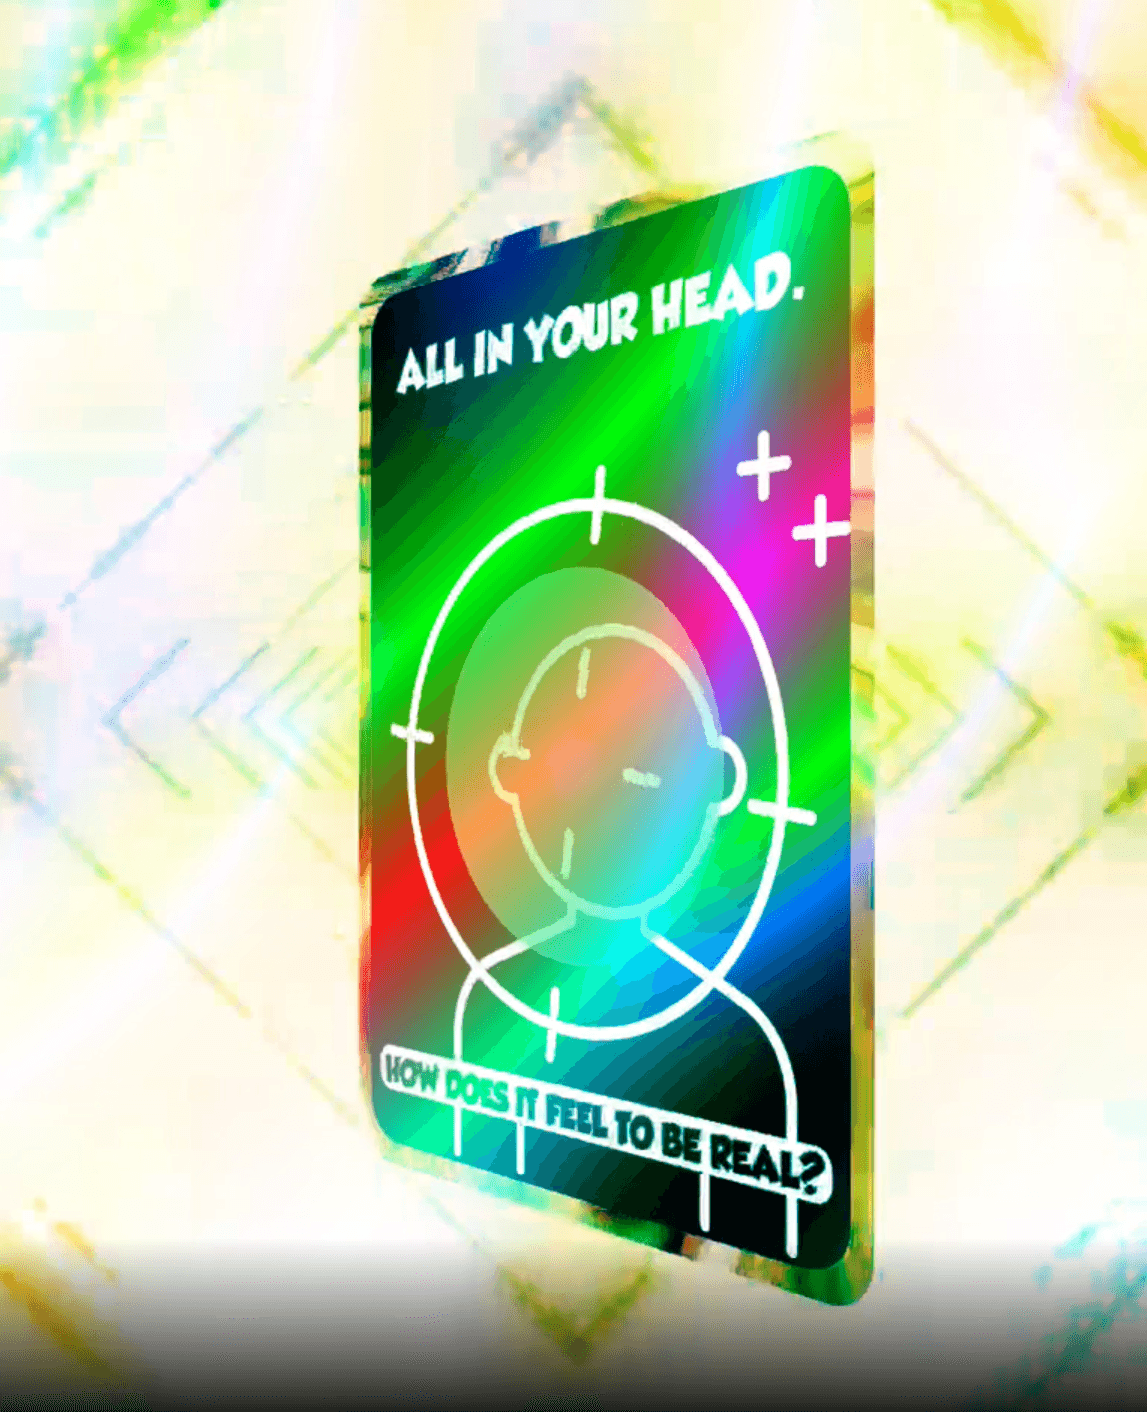 All in your head "How does it feel to be real?" "Lasers" Dez Cible collectible card